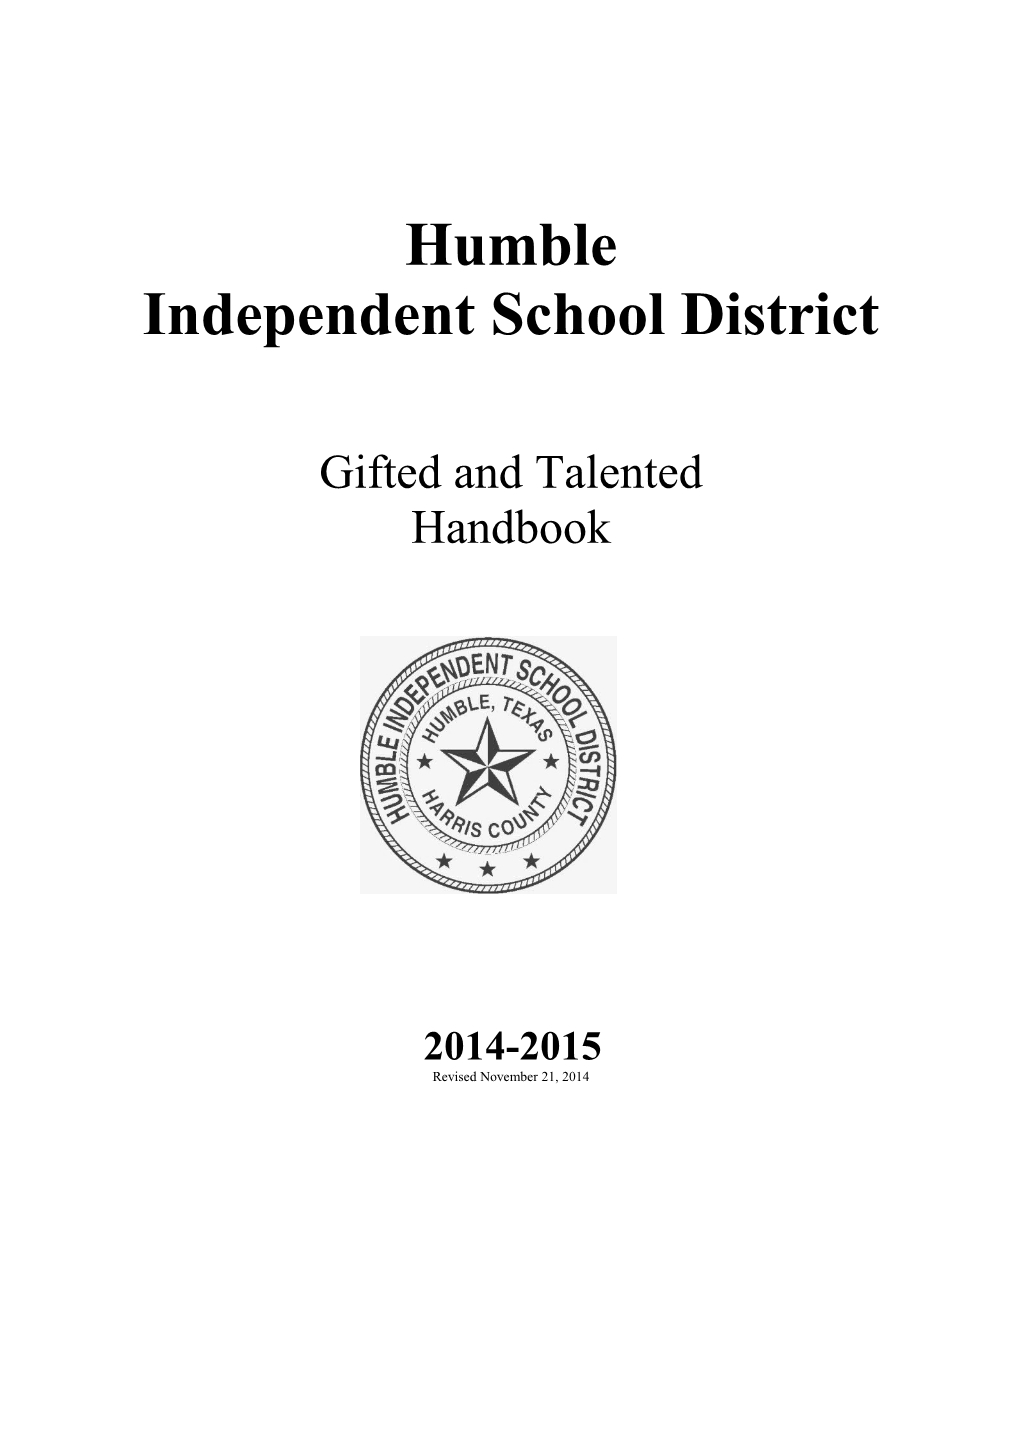 Gifted and Talented Handbook Reformat